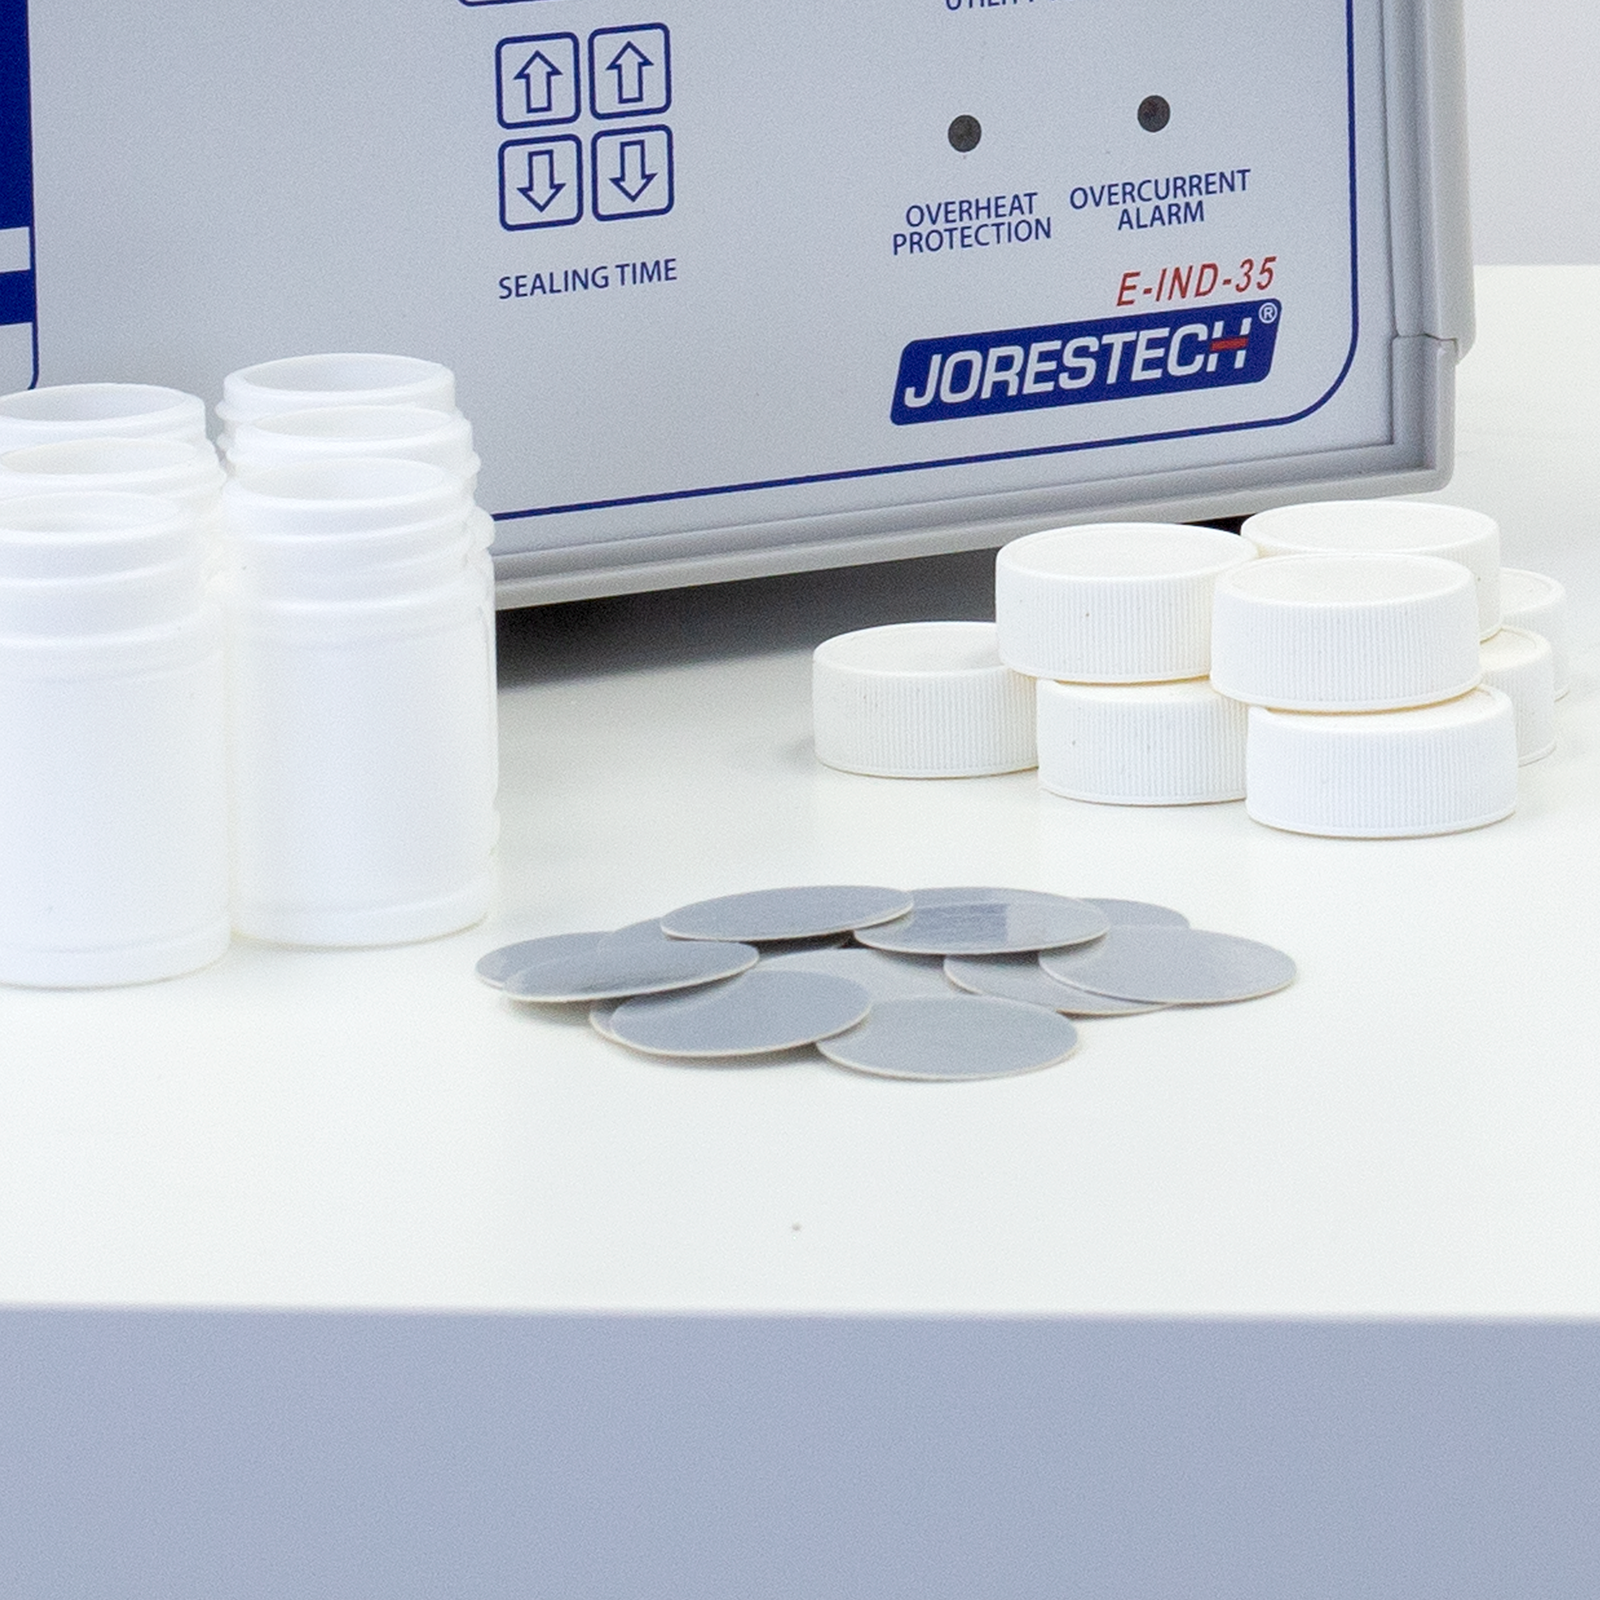 Image shows several container, several caps and several 2 piece induction liners on top of a table and a manual induction sealer in the background.